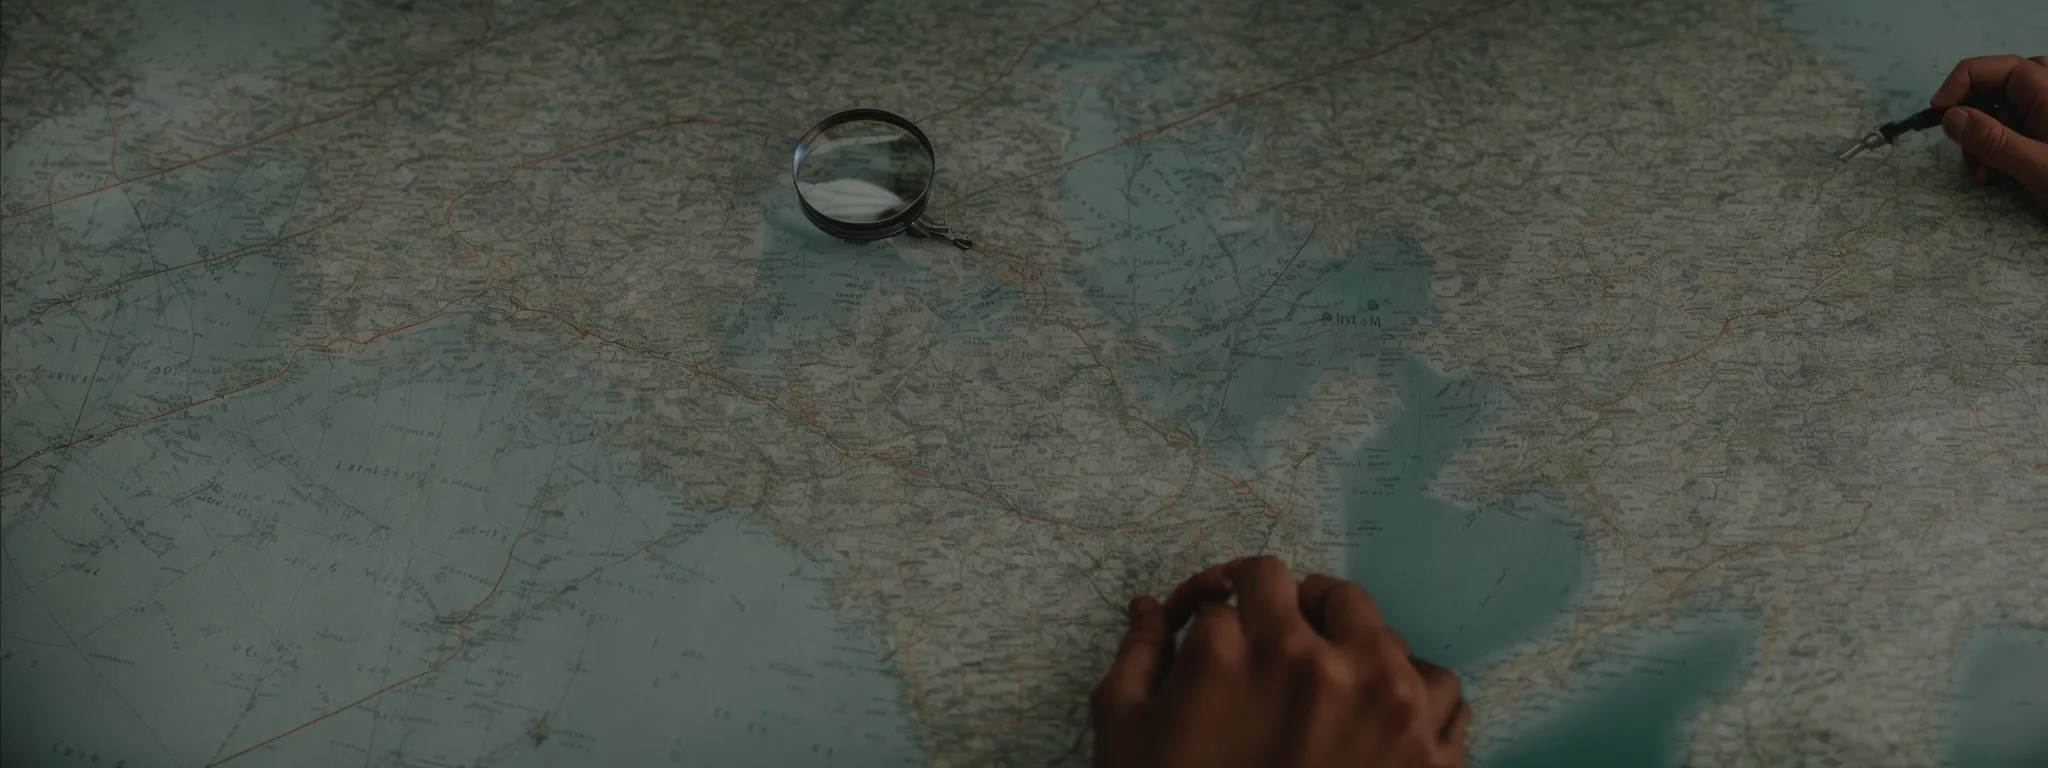 a person with a magnifying glass examining a complex map marked with various paths and intersections.